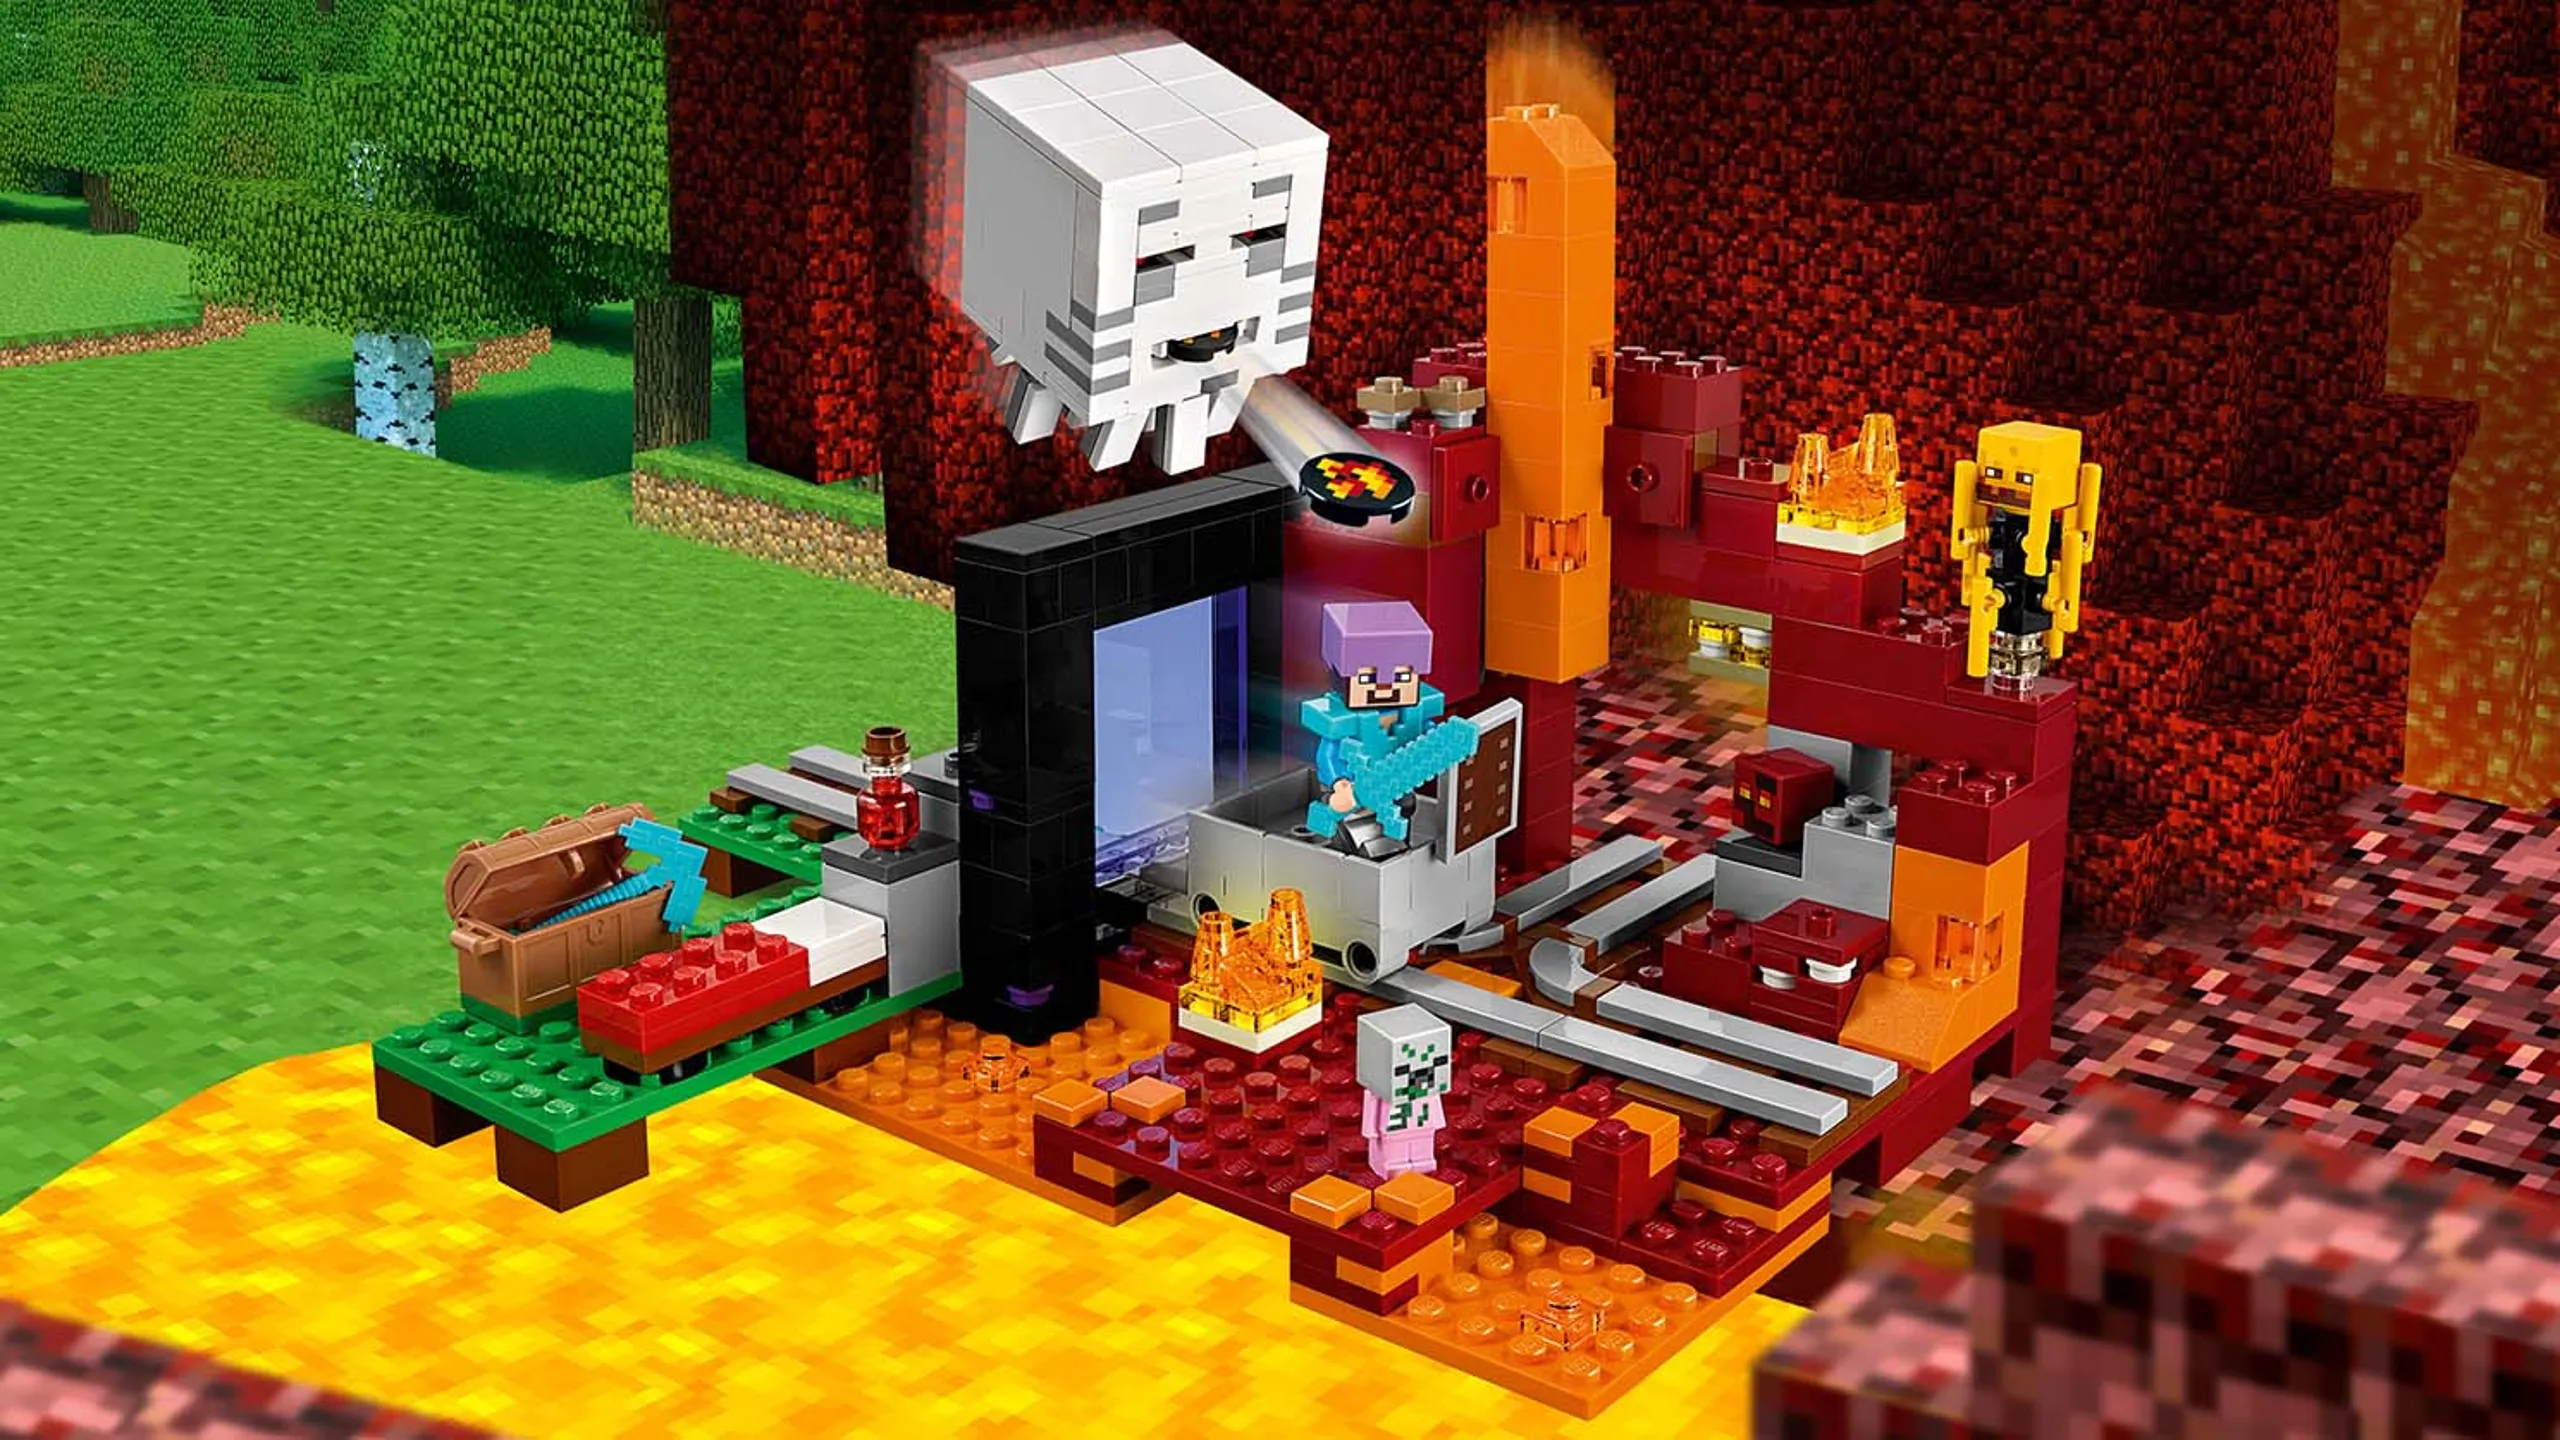 LEGO Minecraft - 21143 The Nether Portal - Steve has put on his armor and in his minecart and travels through the Nether Portal where a flying blaze, a zombie pigman, jumping magma cubes and a fireball shooting ghast are threatening him.